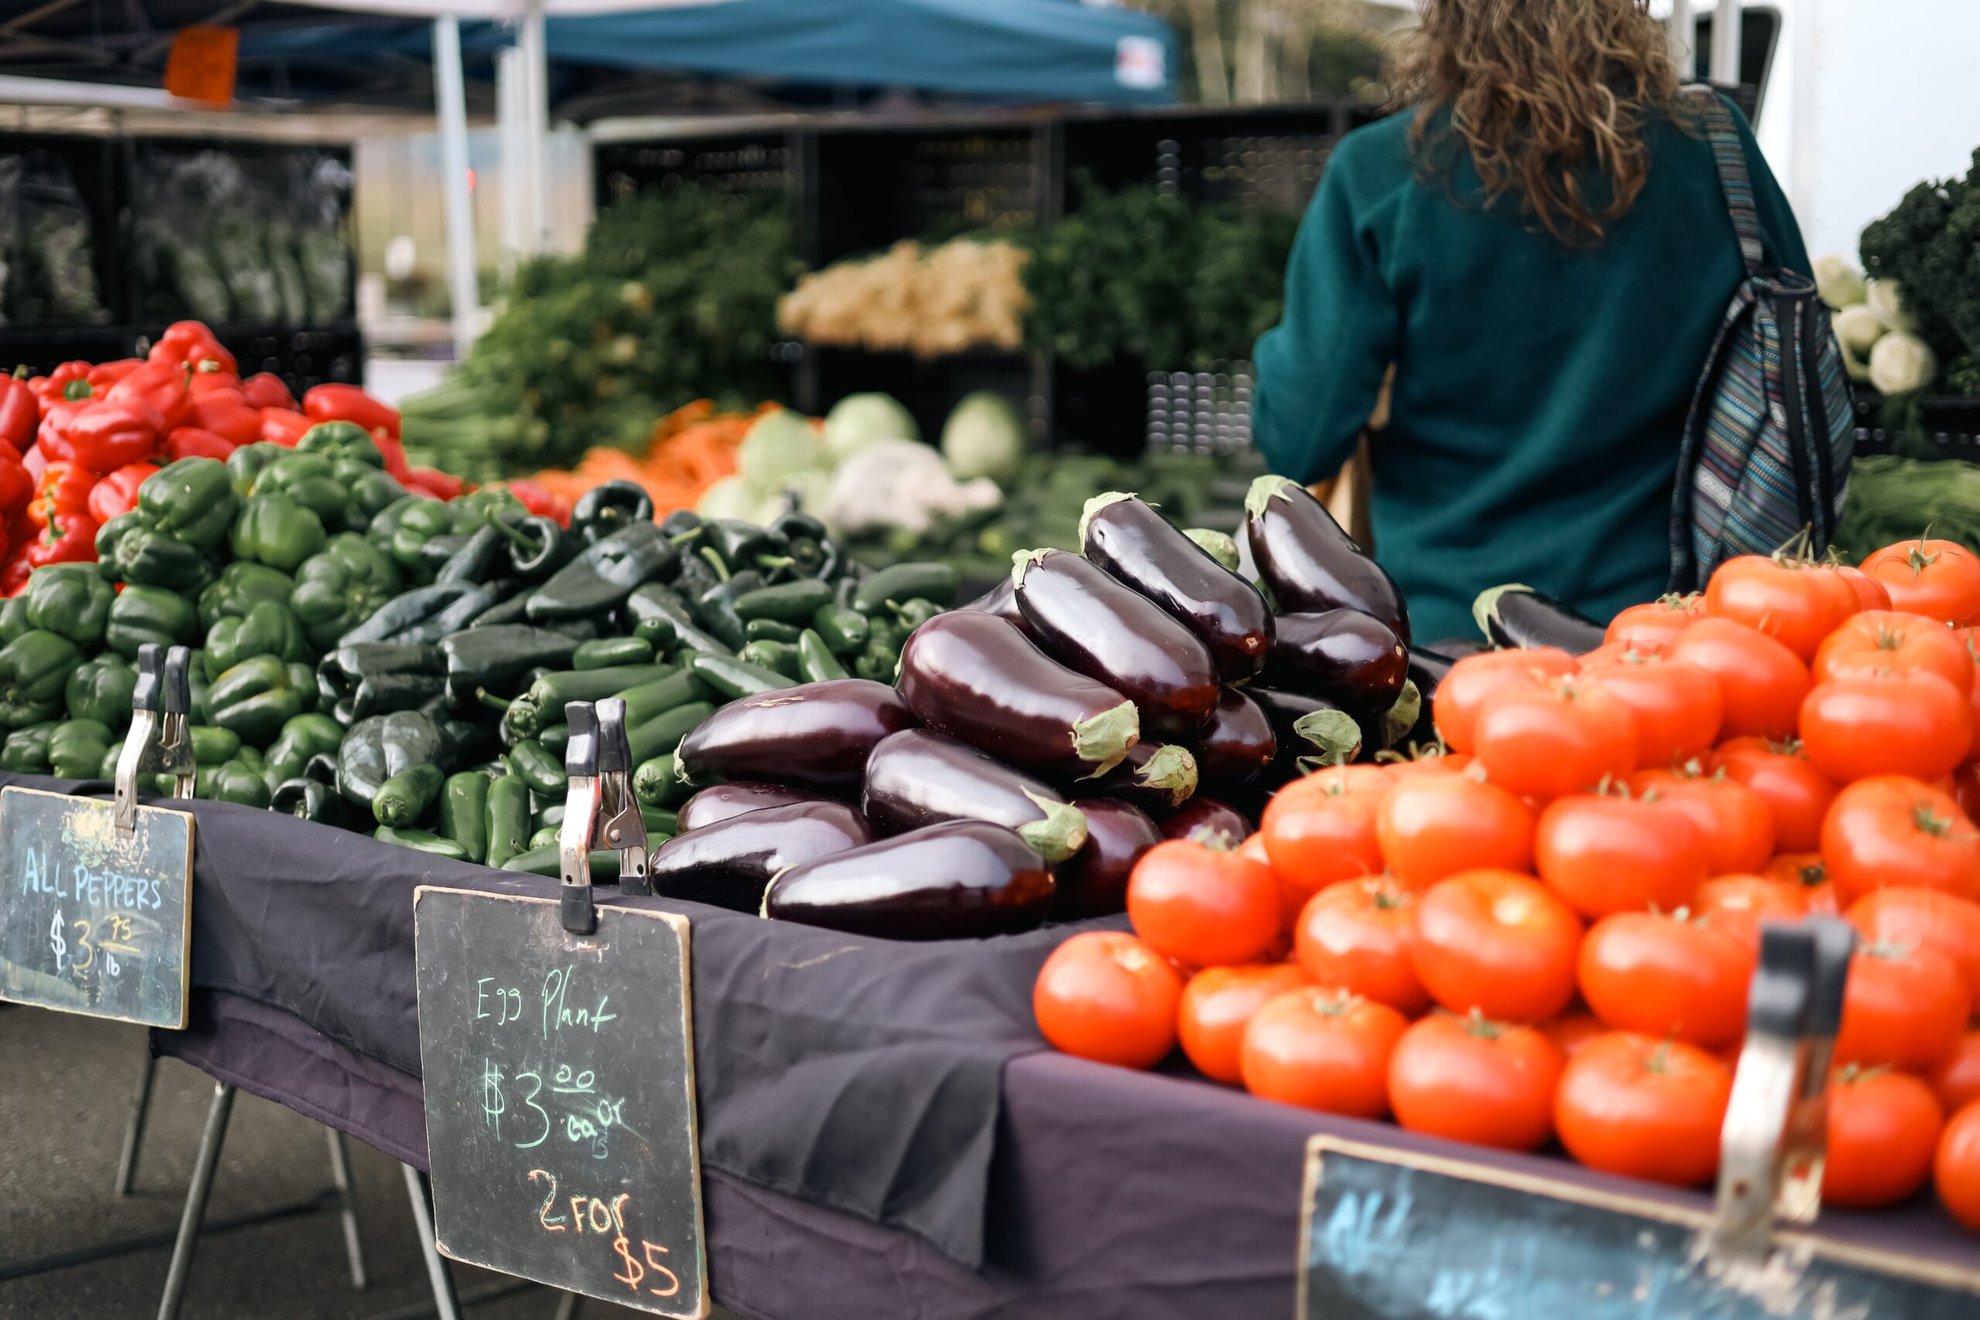 Local produce at a farmer's market are more fresh and often reduce the use of single-use packaging. (Credit: Robert Gareth via Unsplash)